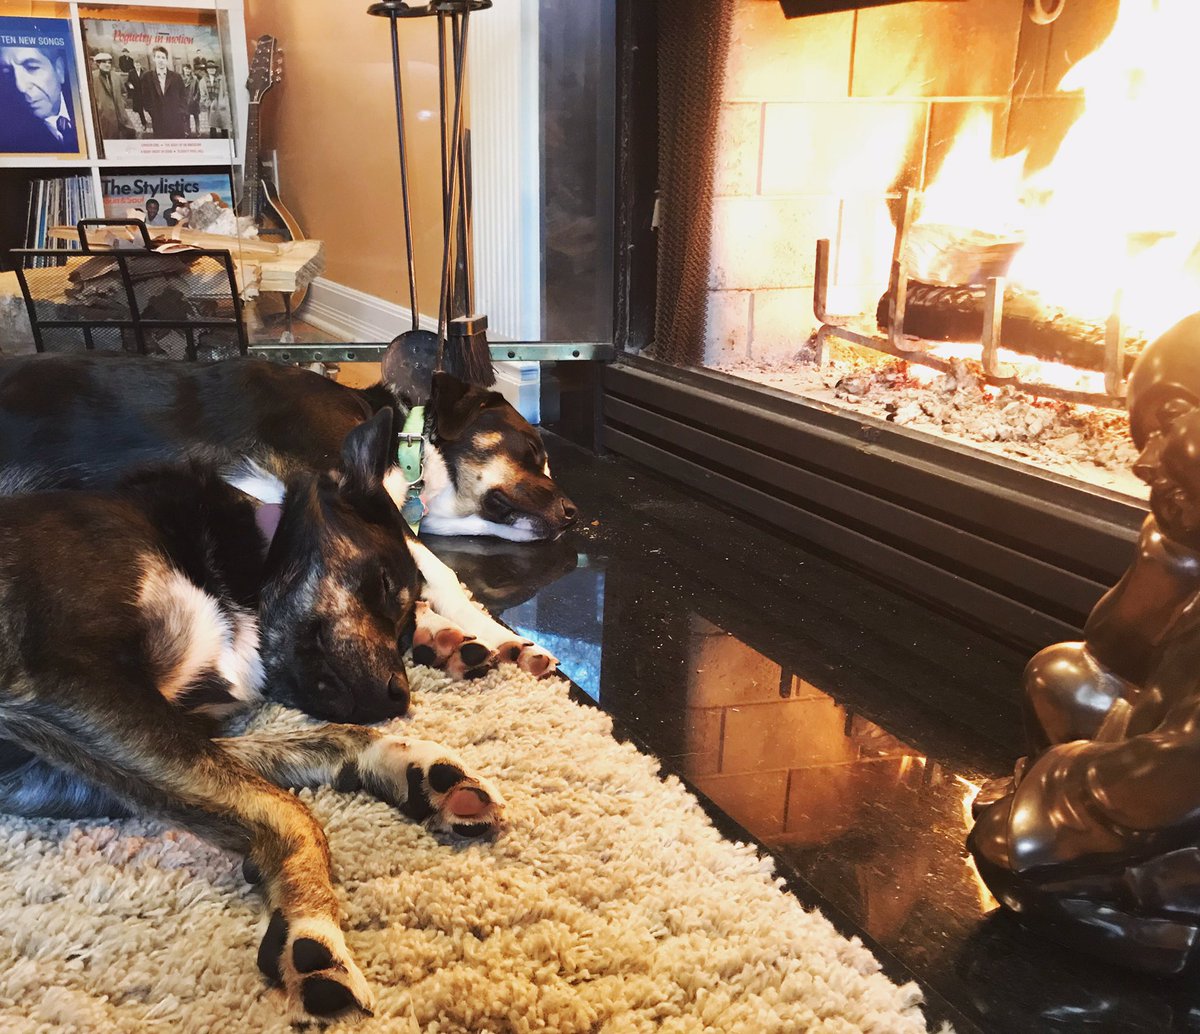 This Monday has just gone completely to the dogs... #bestfriends #warmfire #notalone #mondaymotivation